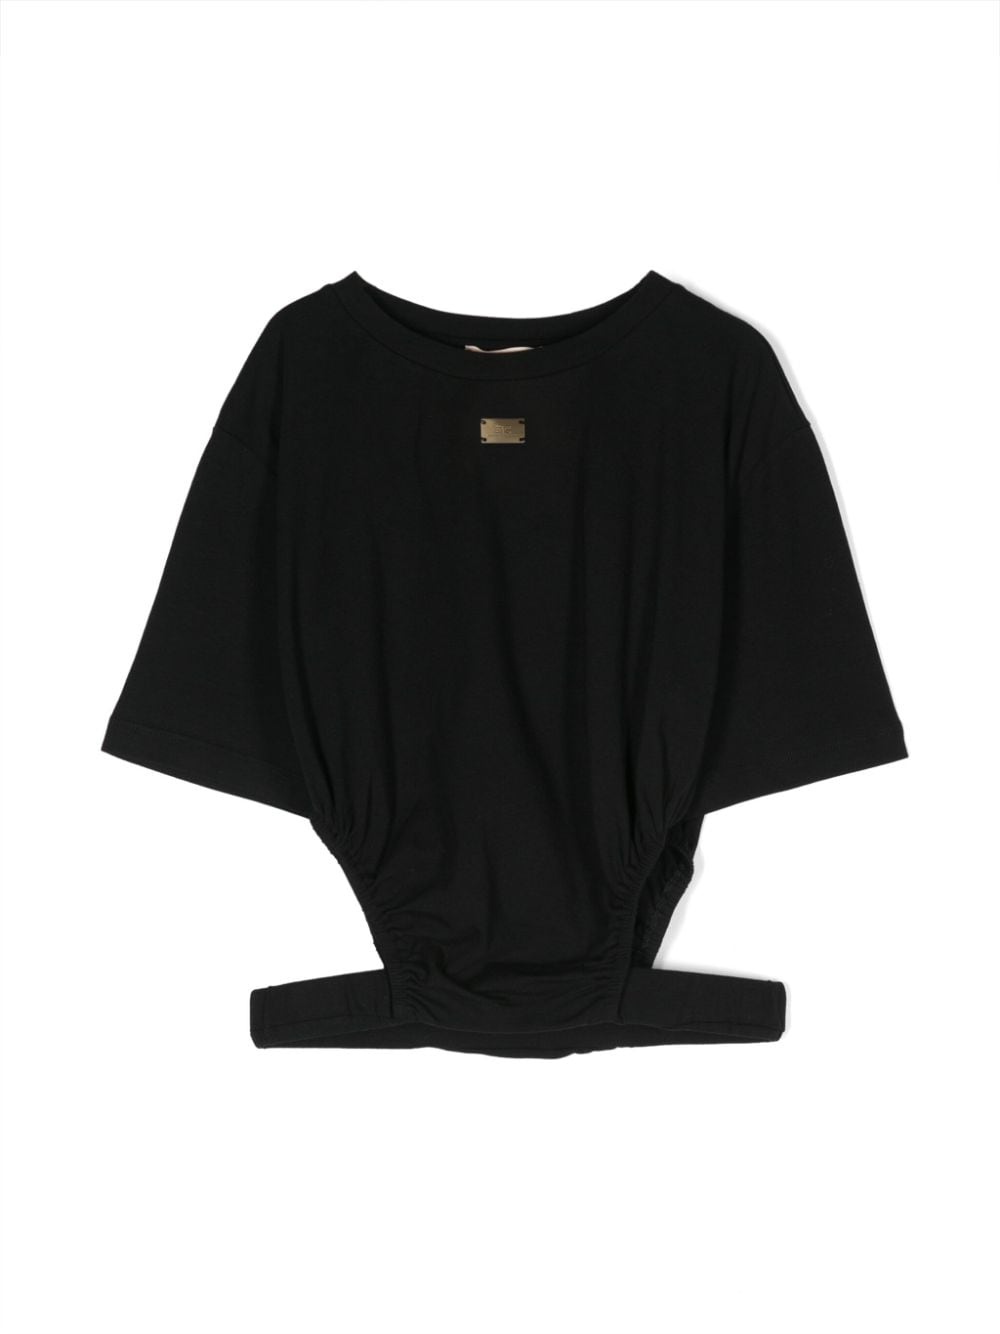 Black top for girls with logo